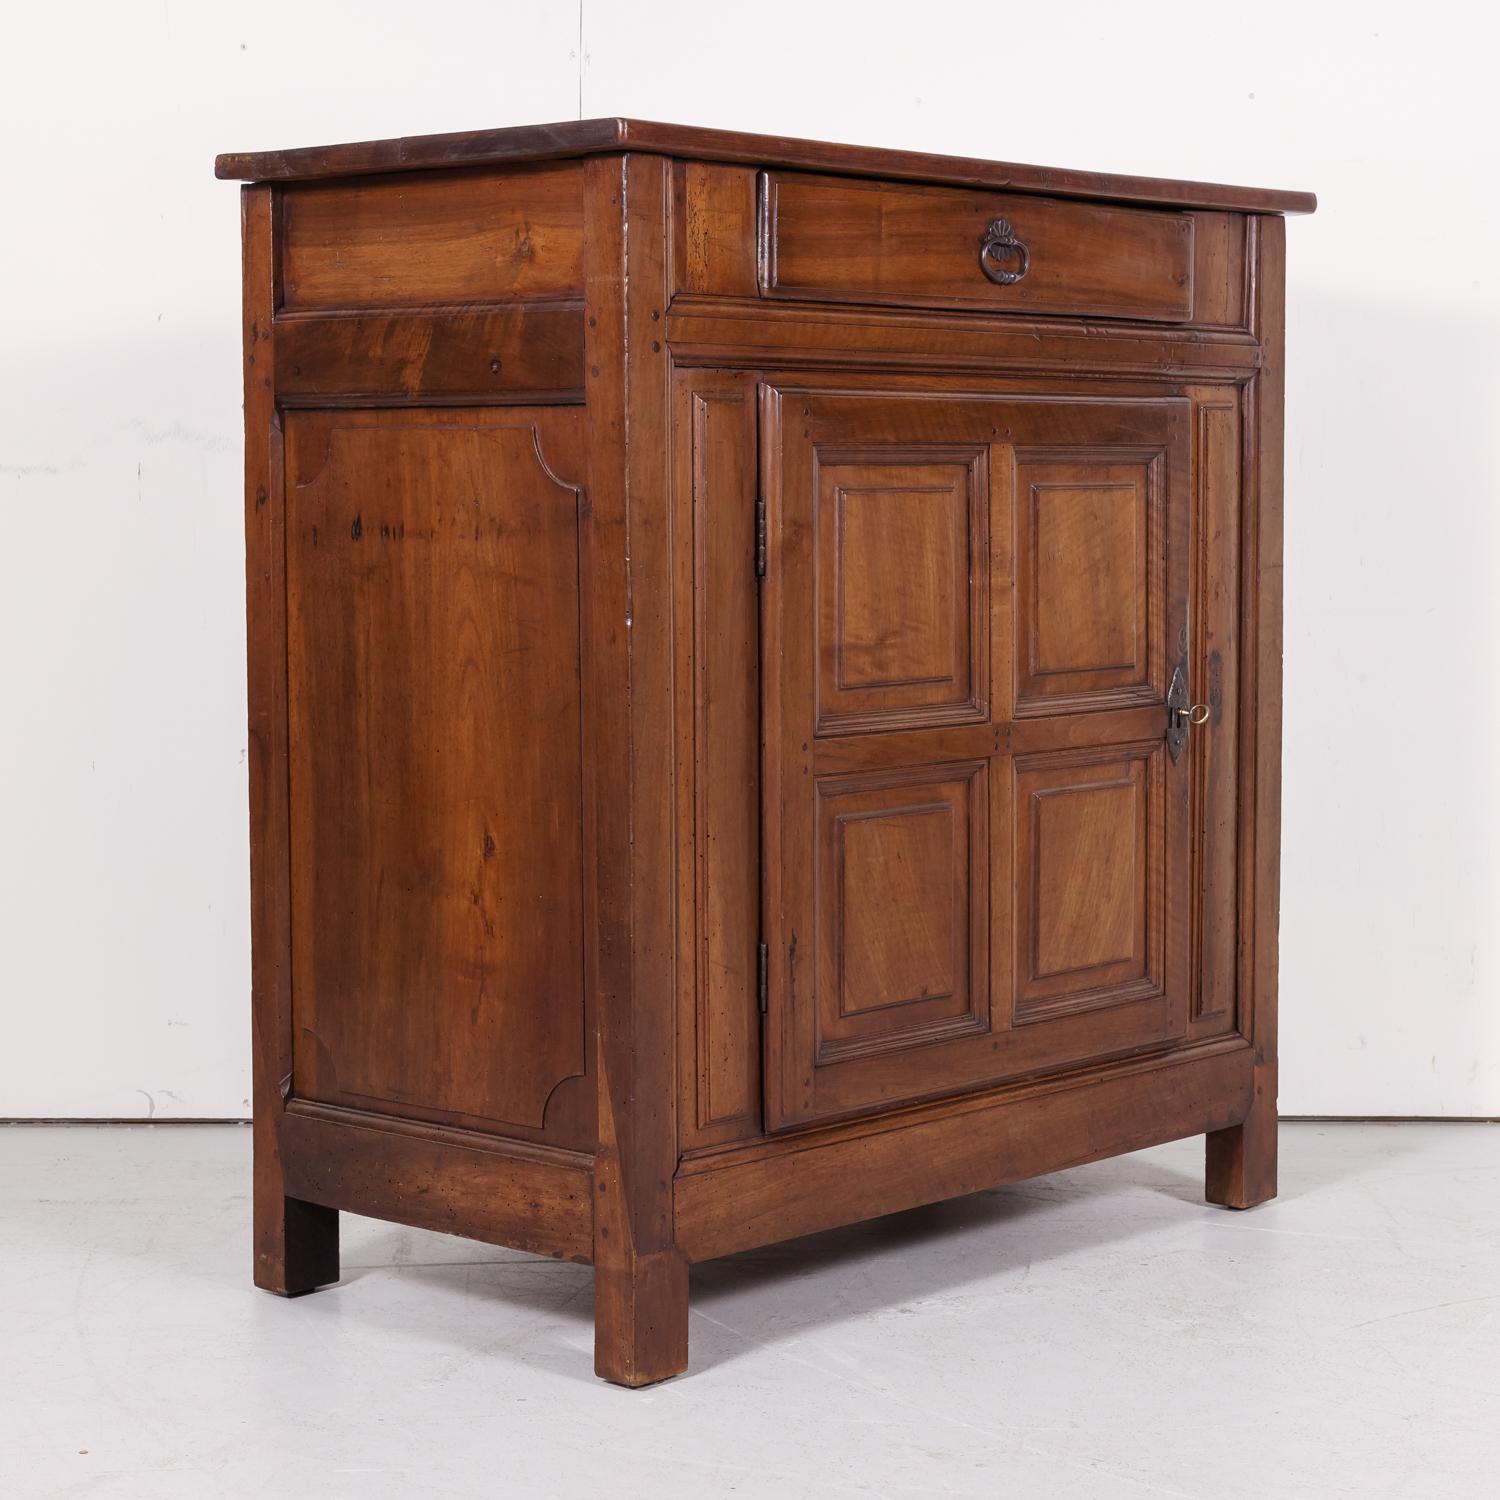 Early 19th Century Louis XIII Walnut Confiturier or Jam Cabinet from Normandy 1